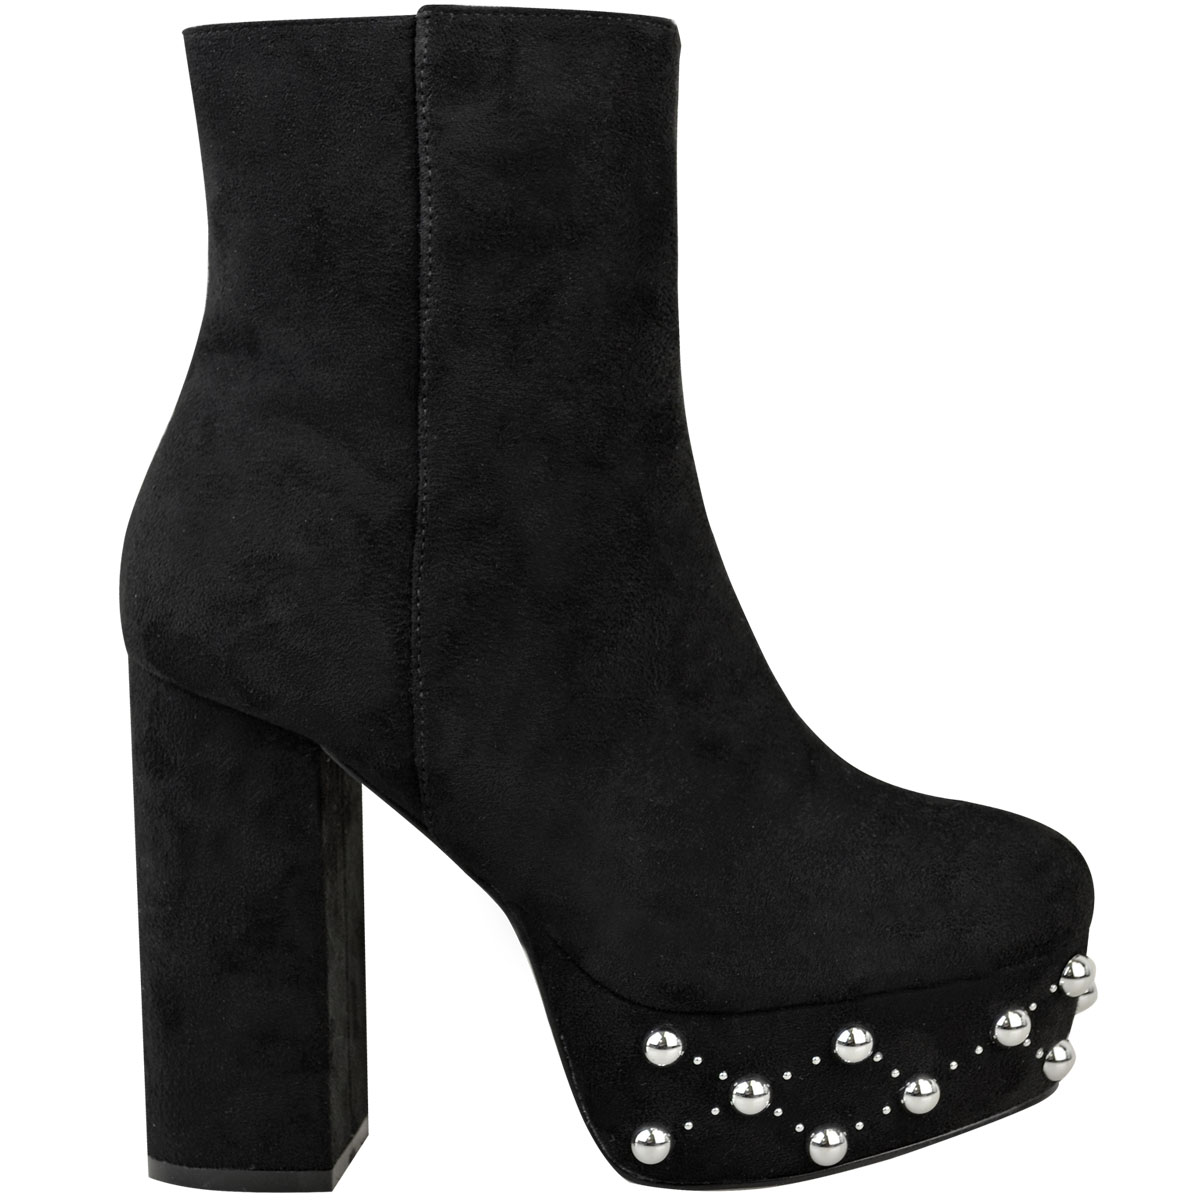 Womens Ladies Chunky Platform Ankle Boots Studded Block High Heels Shoes Size 